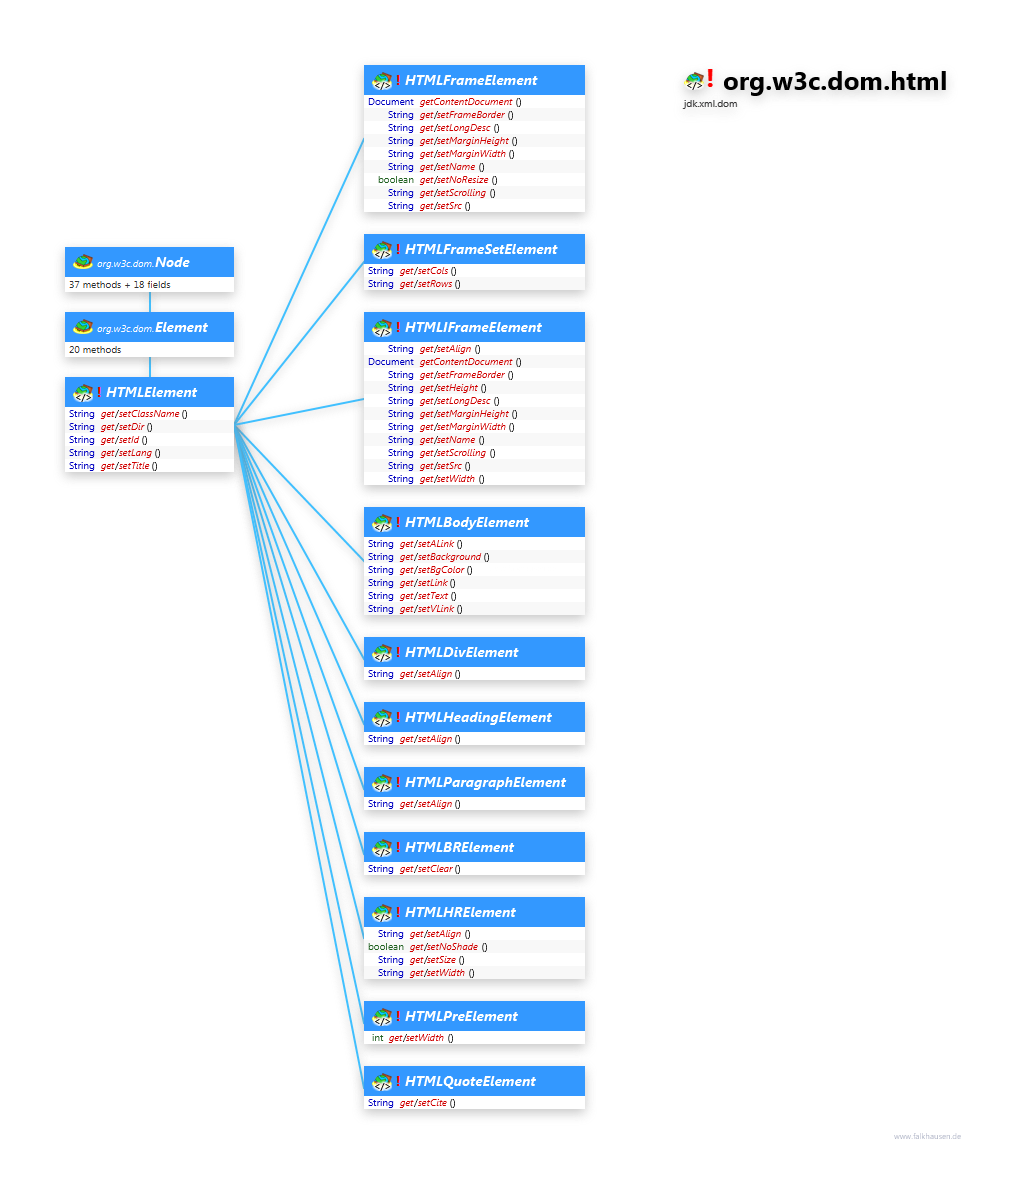 org.w3c.dom.html Structure Elements class diagram and api documentation for Java 10